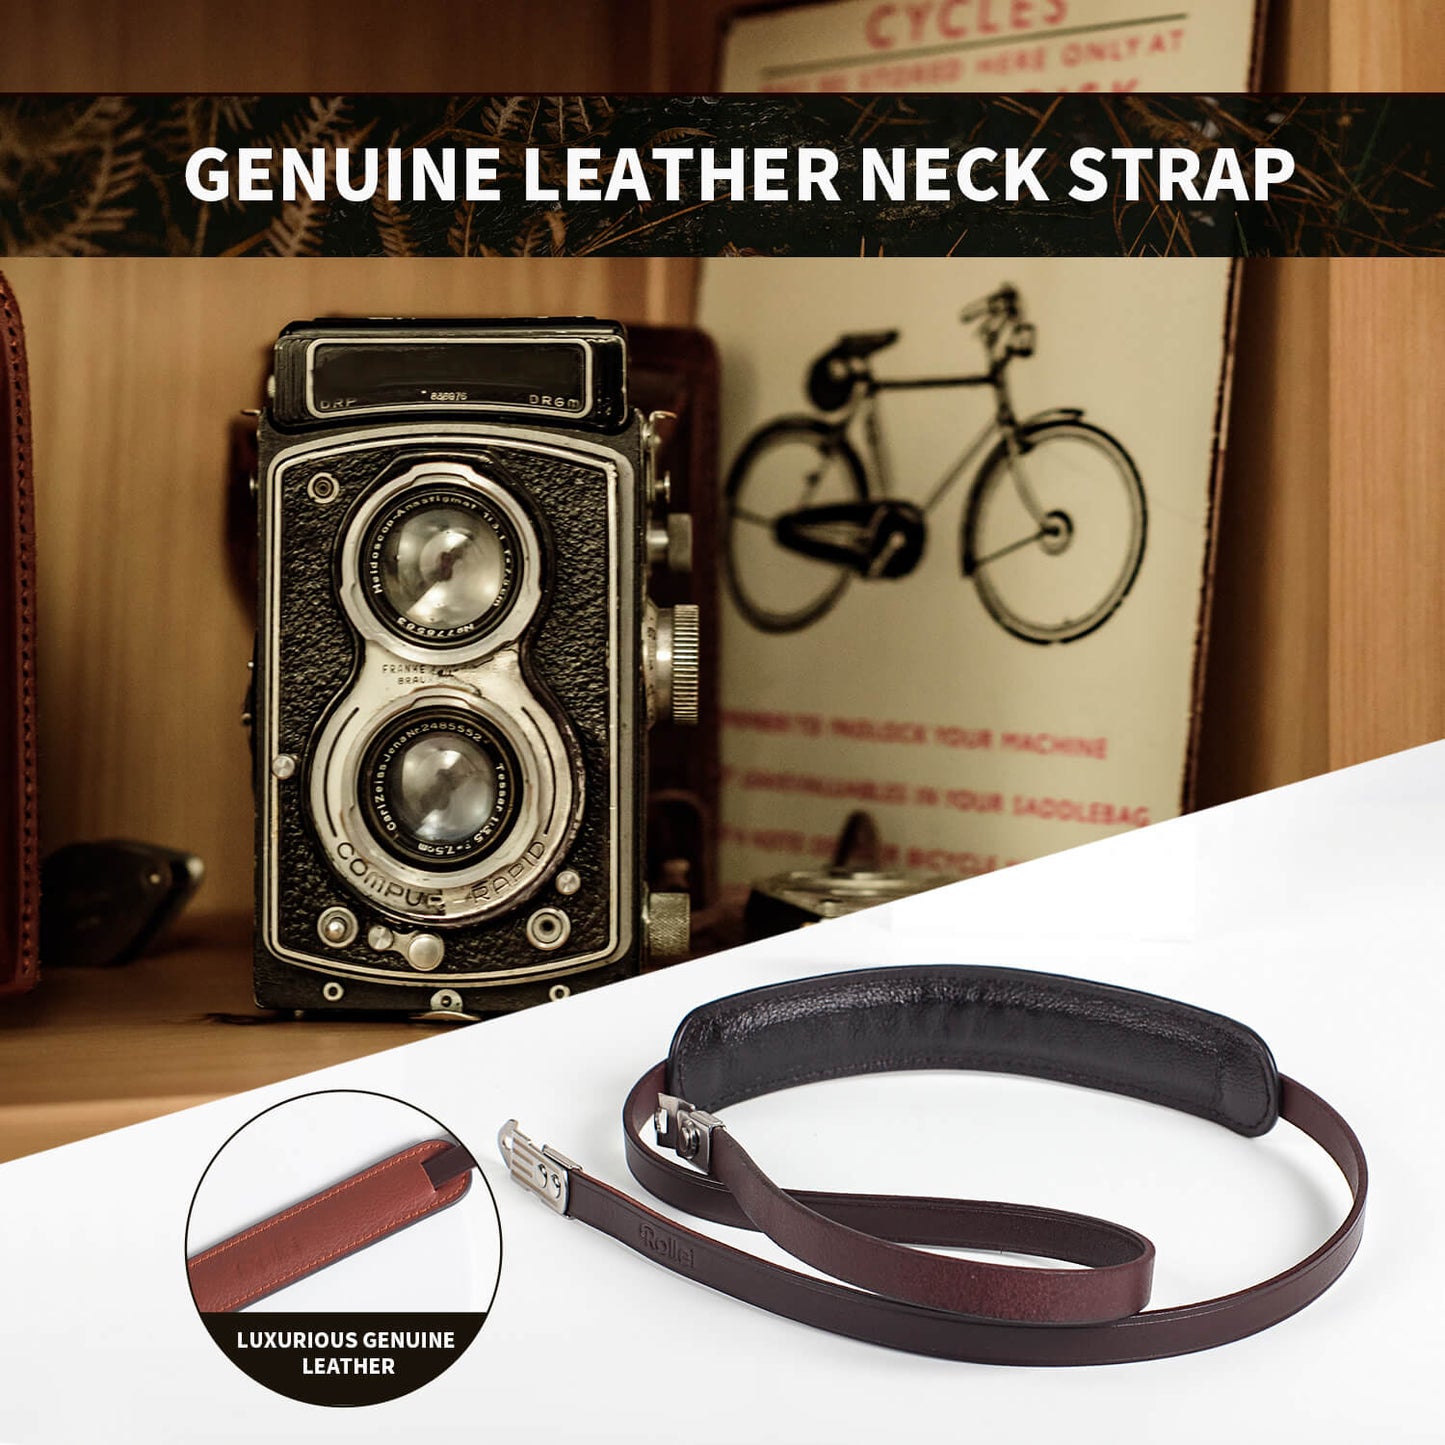 Leather Neck Strap With Shoulder Pad For Rolleiflex 2.8C 2.8D TLR Camera